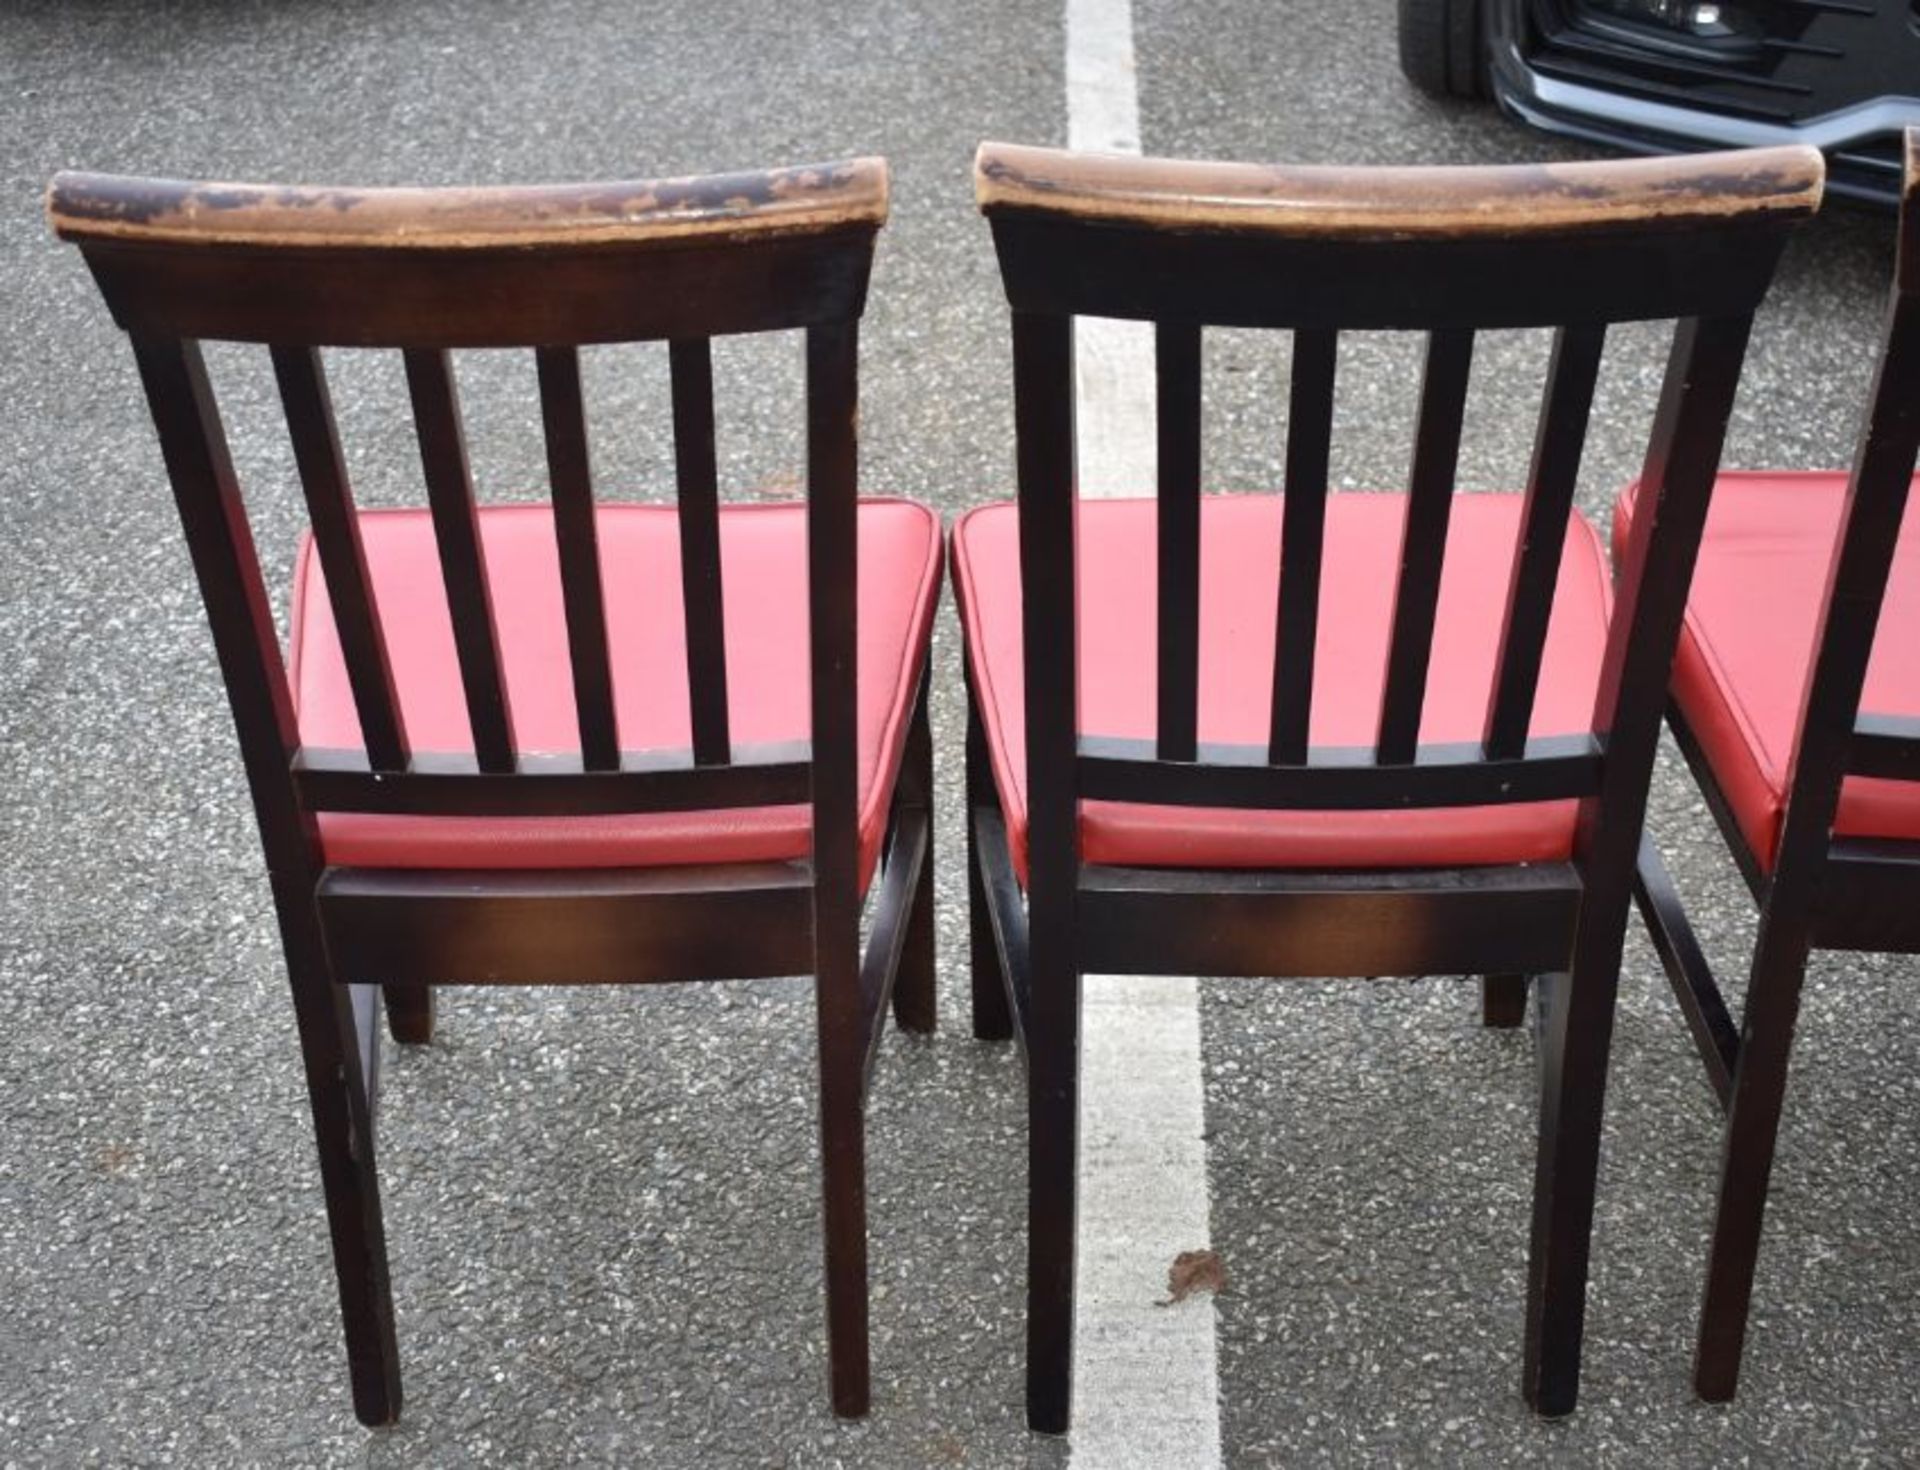 8 x Restaurant Dining Chairs With Dark Stained Wood Finish and Red Leather Seat Pads - Recently - Image 3 of 7